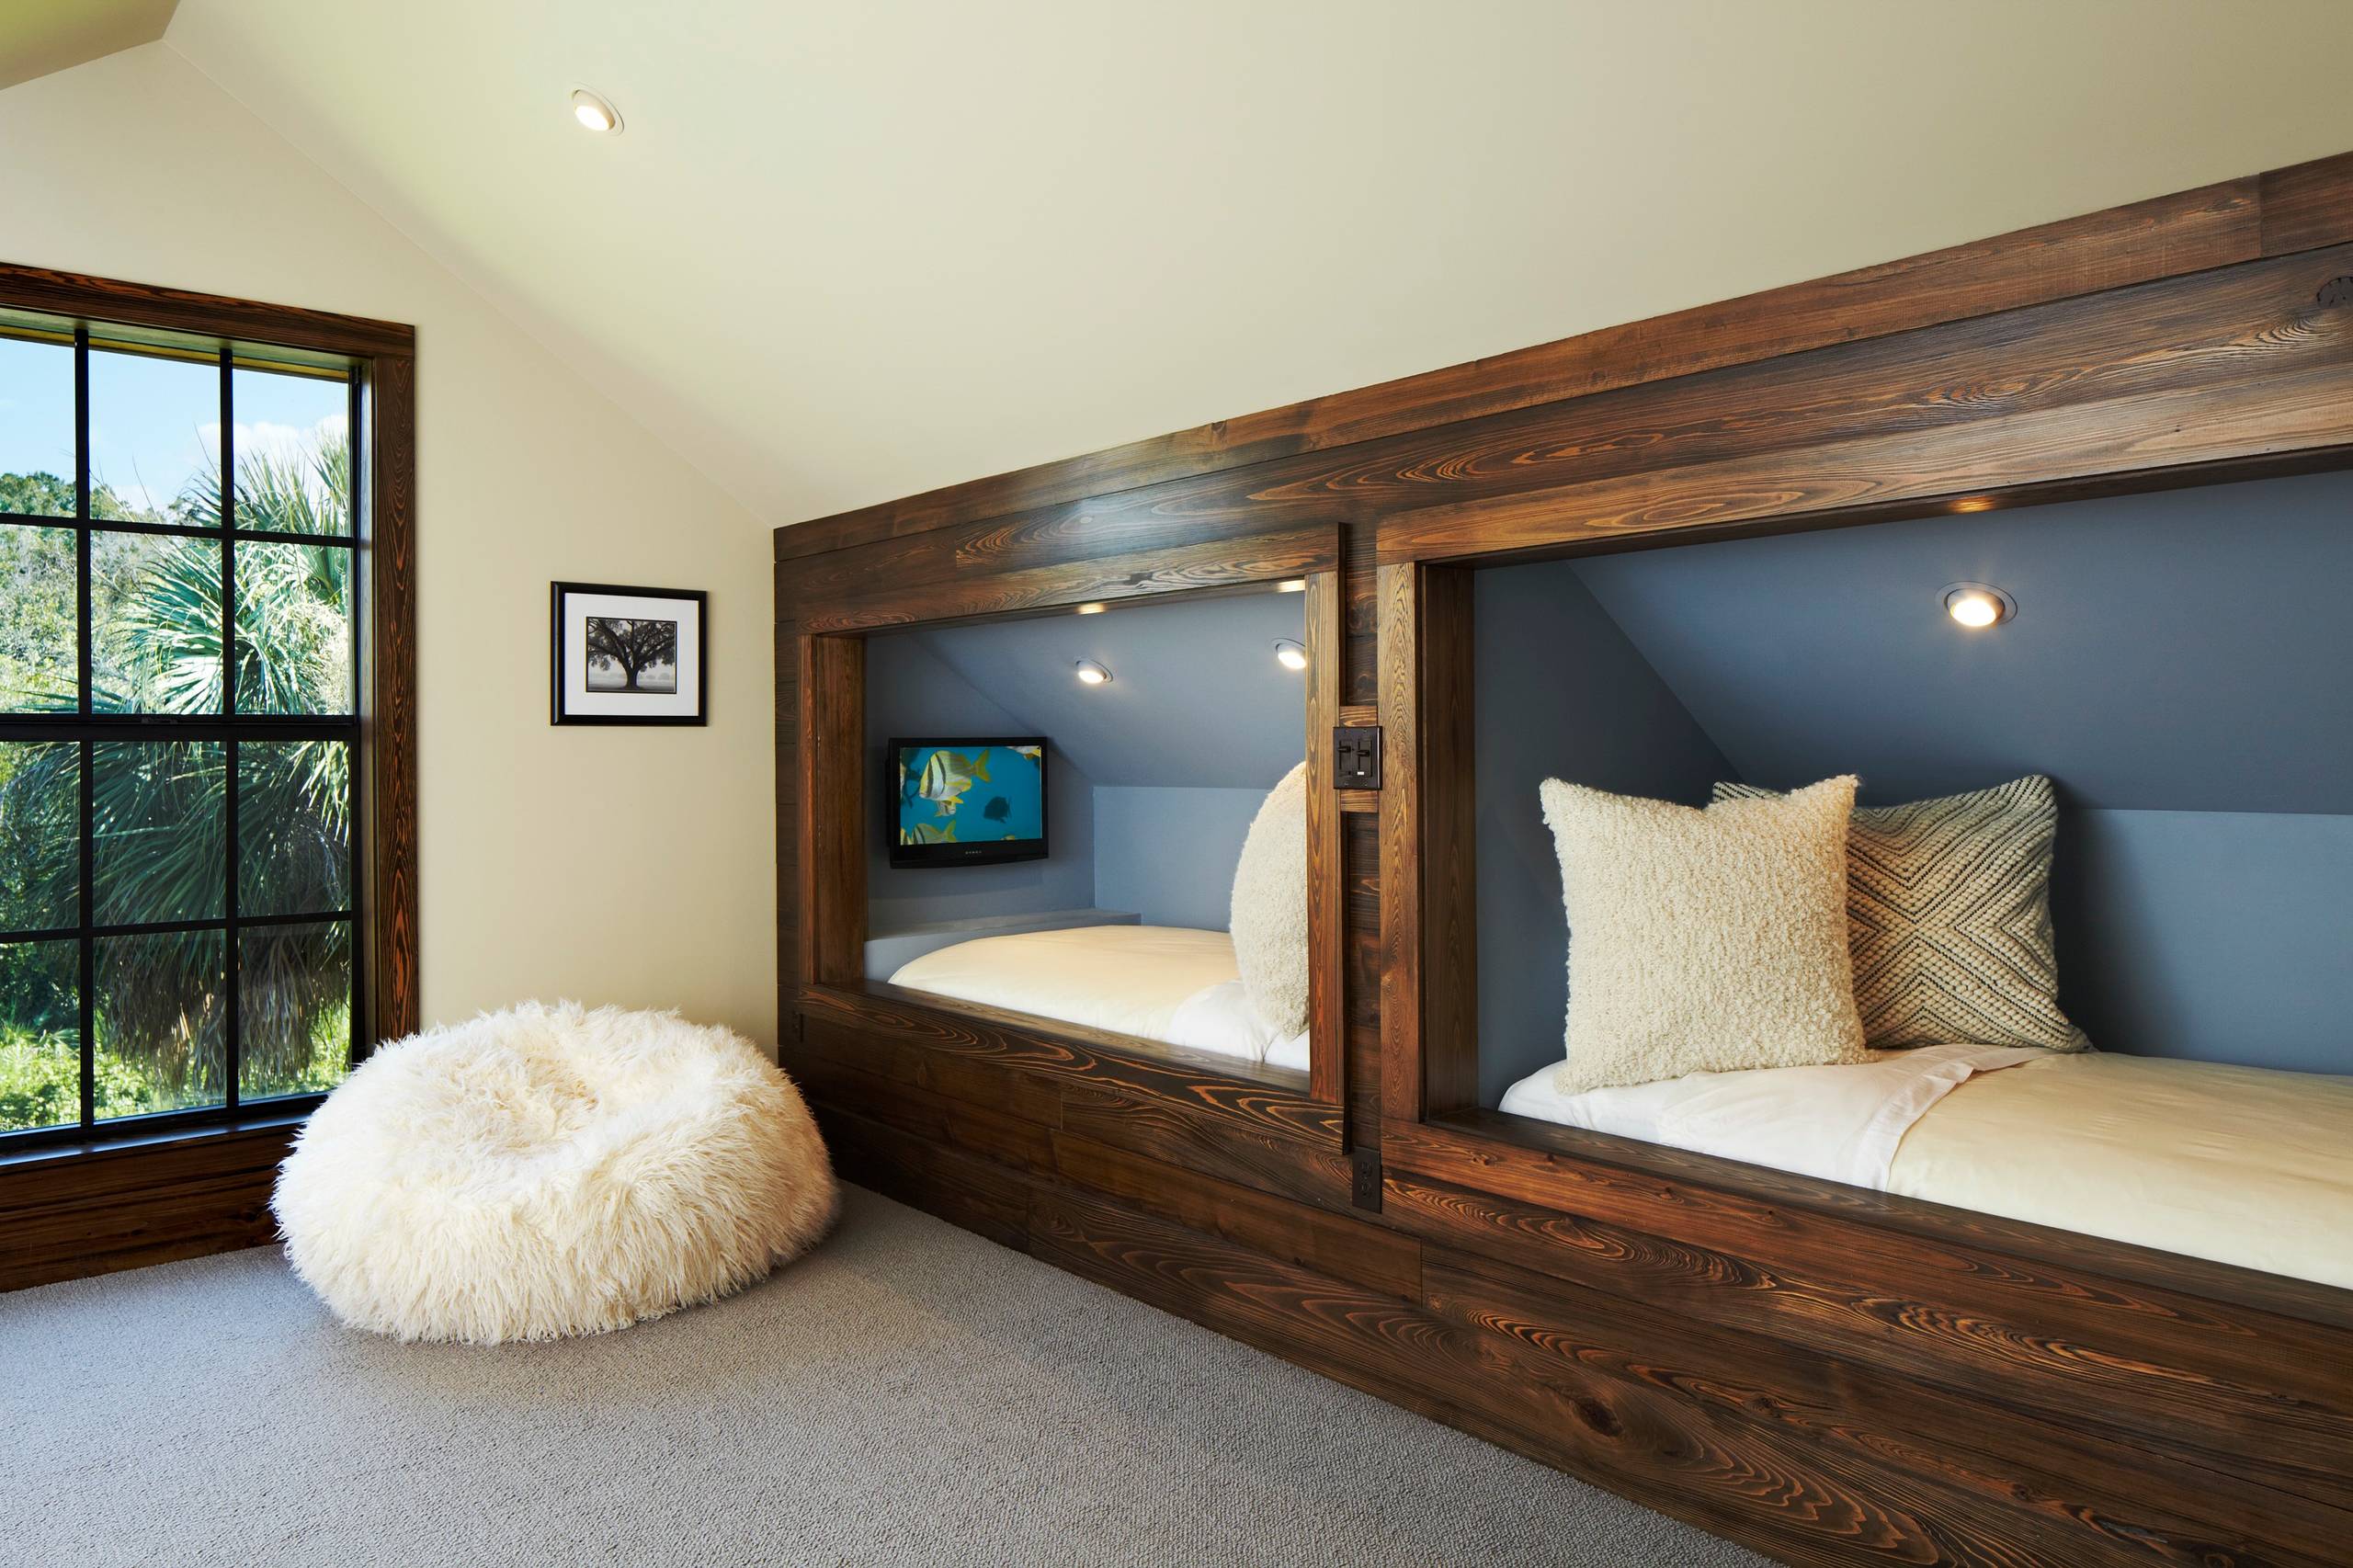 Bunk Bed Cubby Houzz, Cubby Bunk Bed